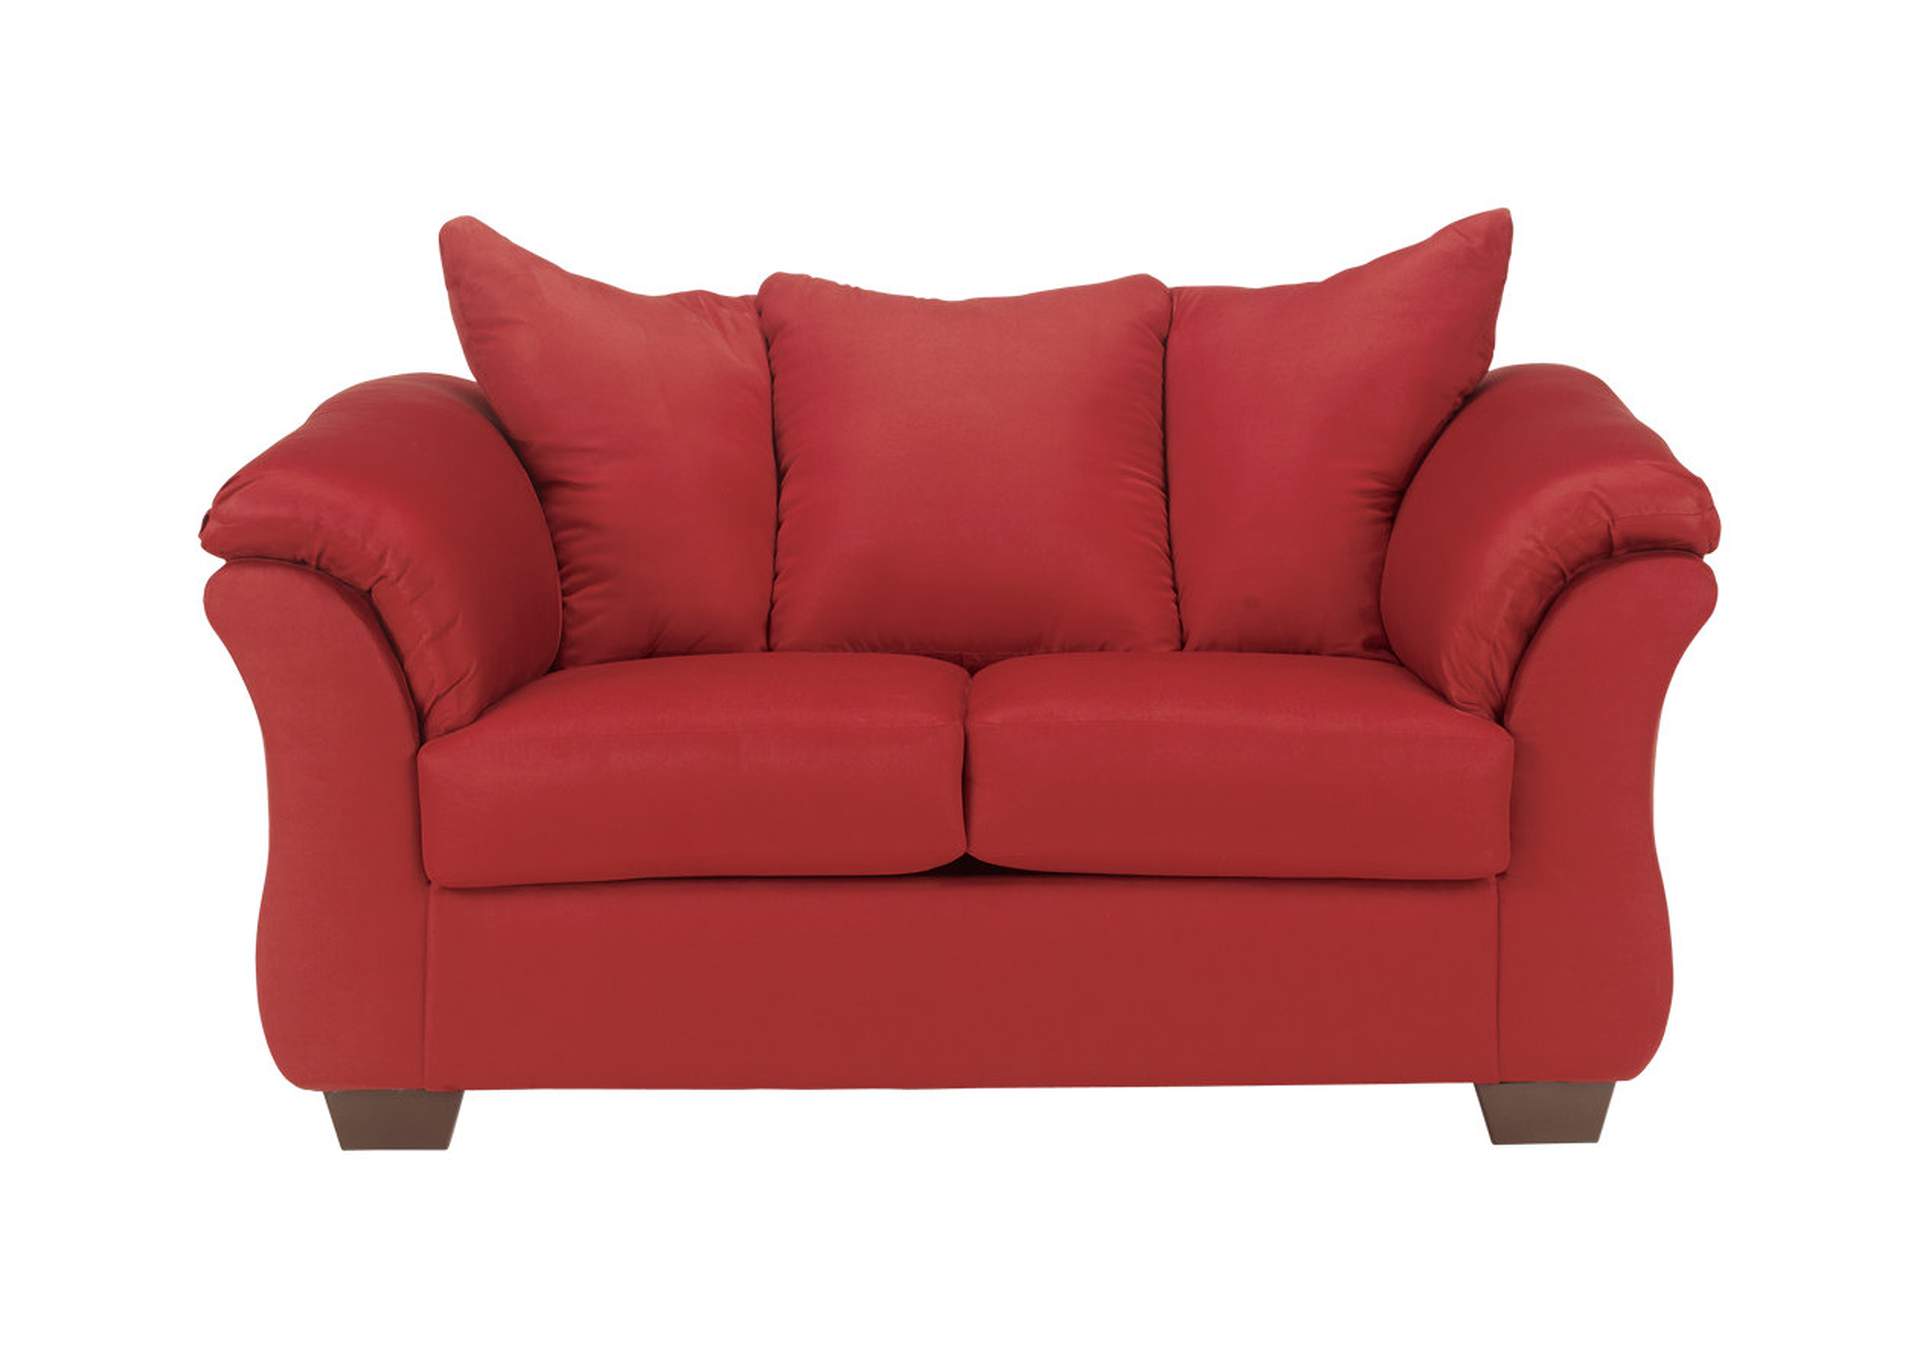 Darcy Sofa, Loveseat and Ottoman,Signature Design By Ashley